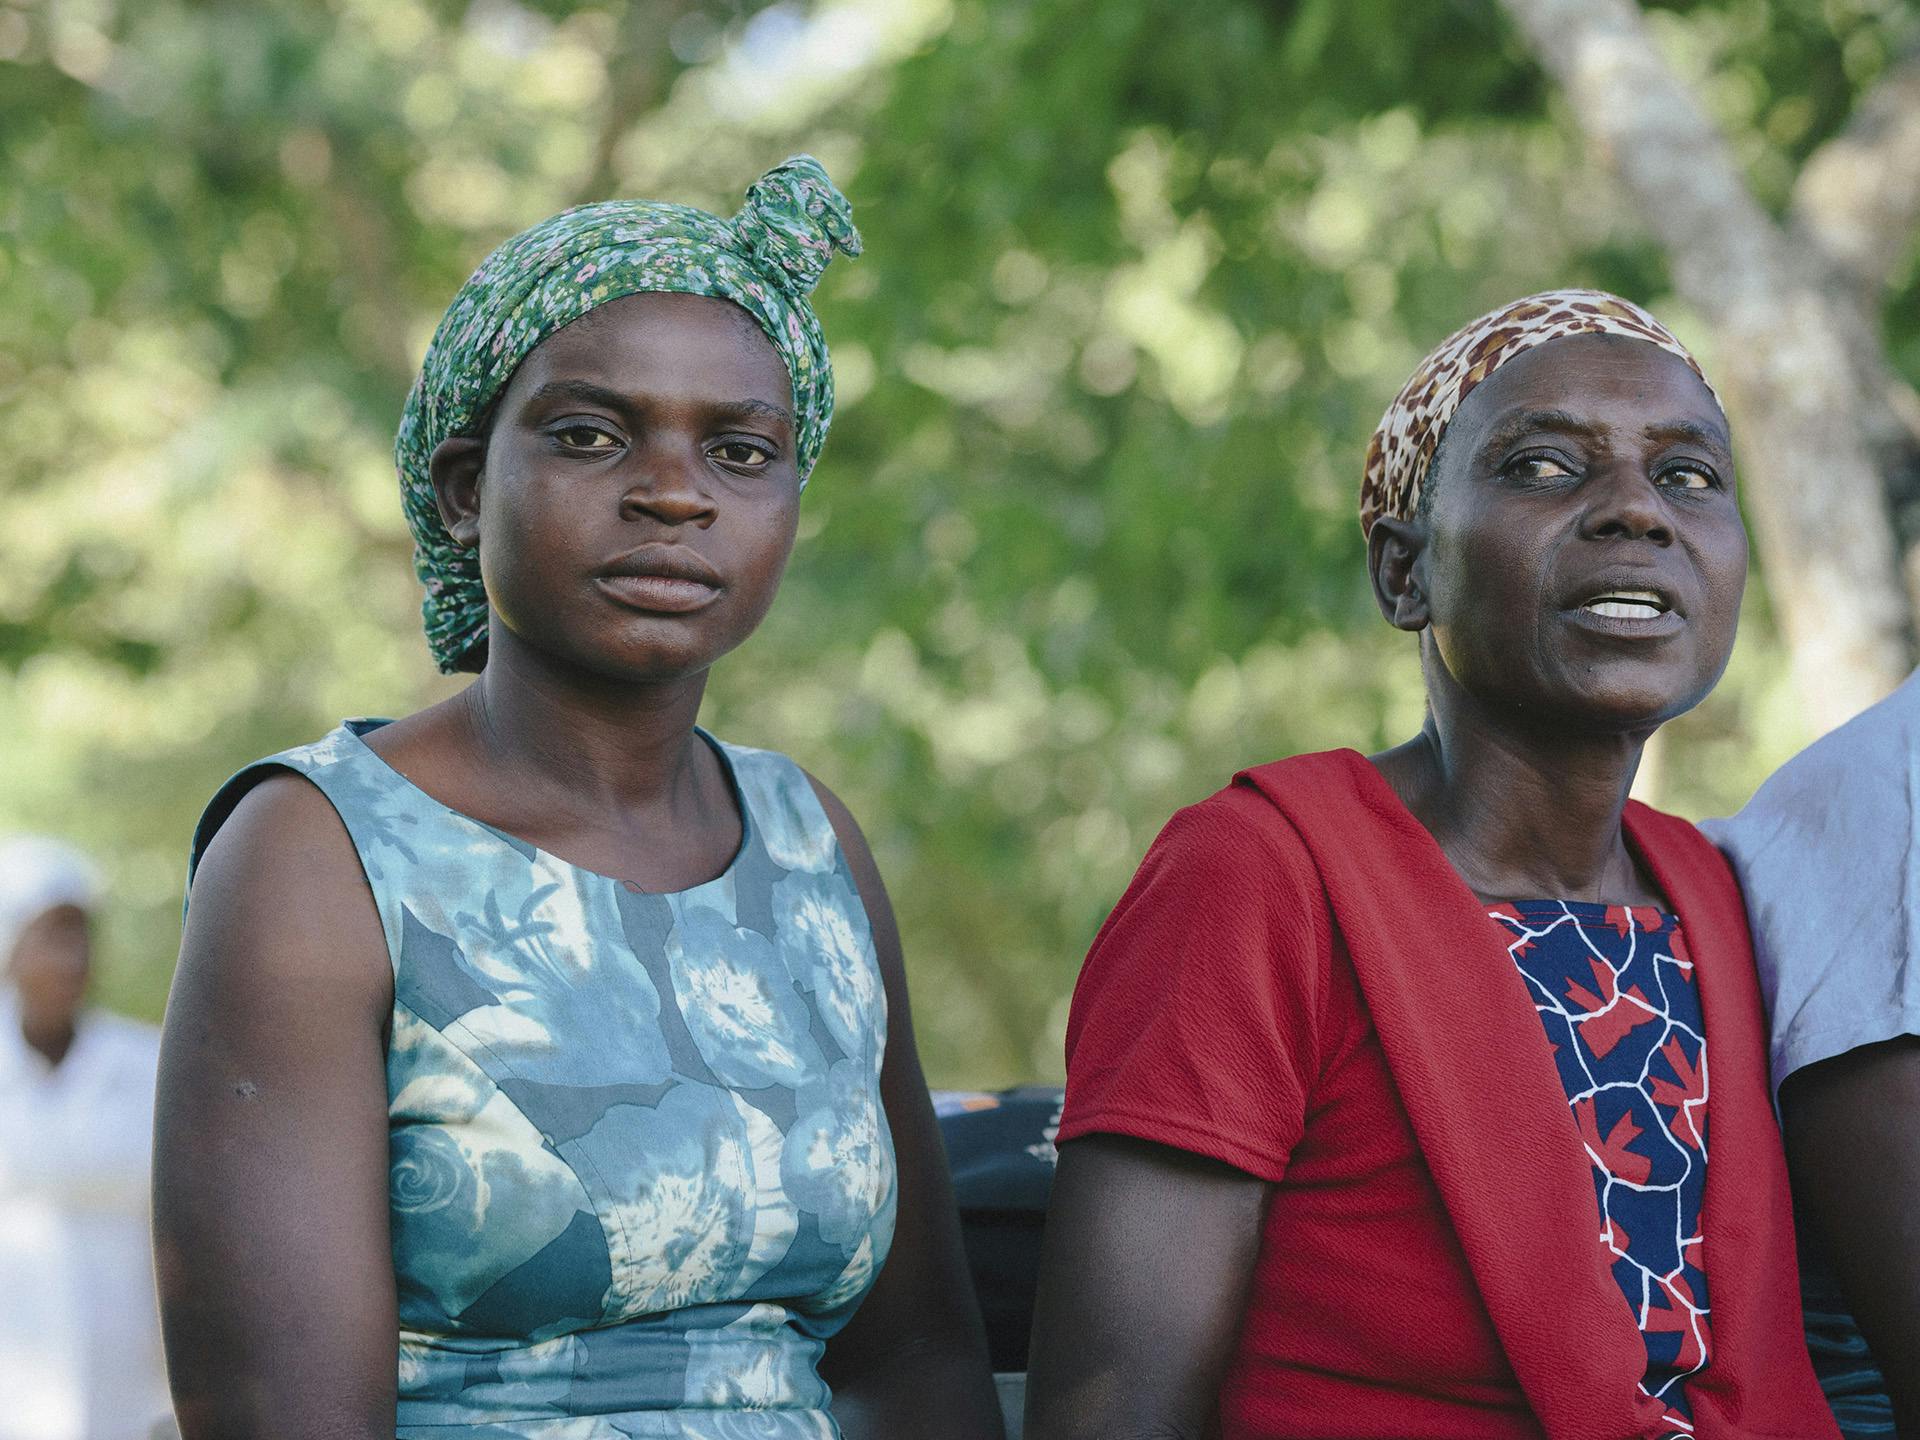 Two Zimbabwean women sitting next to each other. Behind them there are trees.